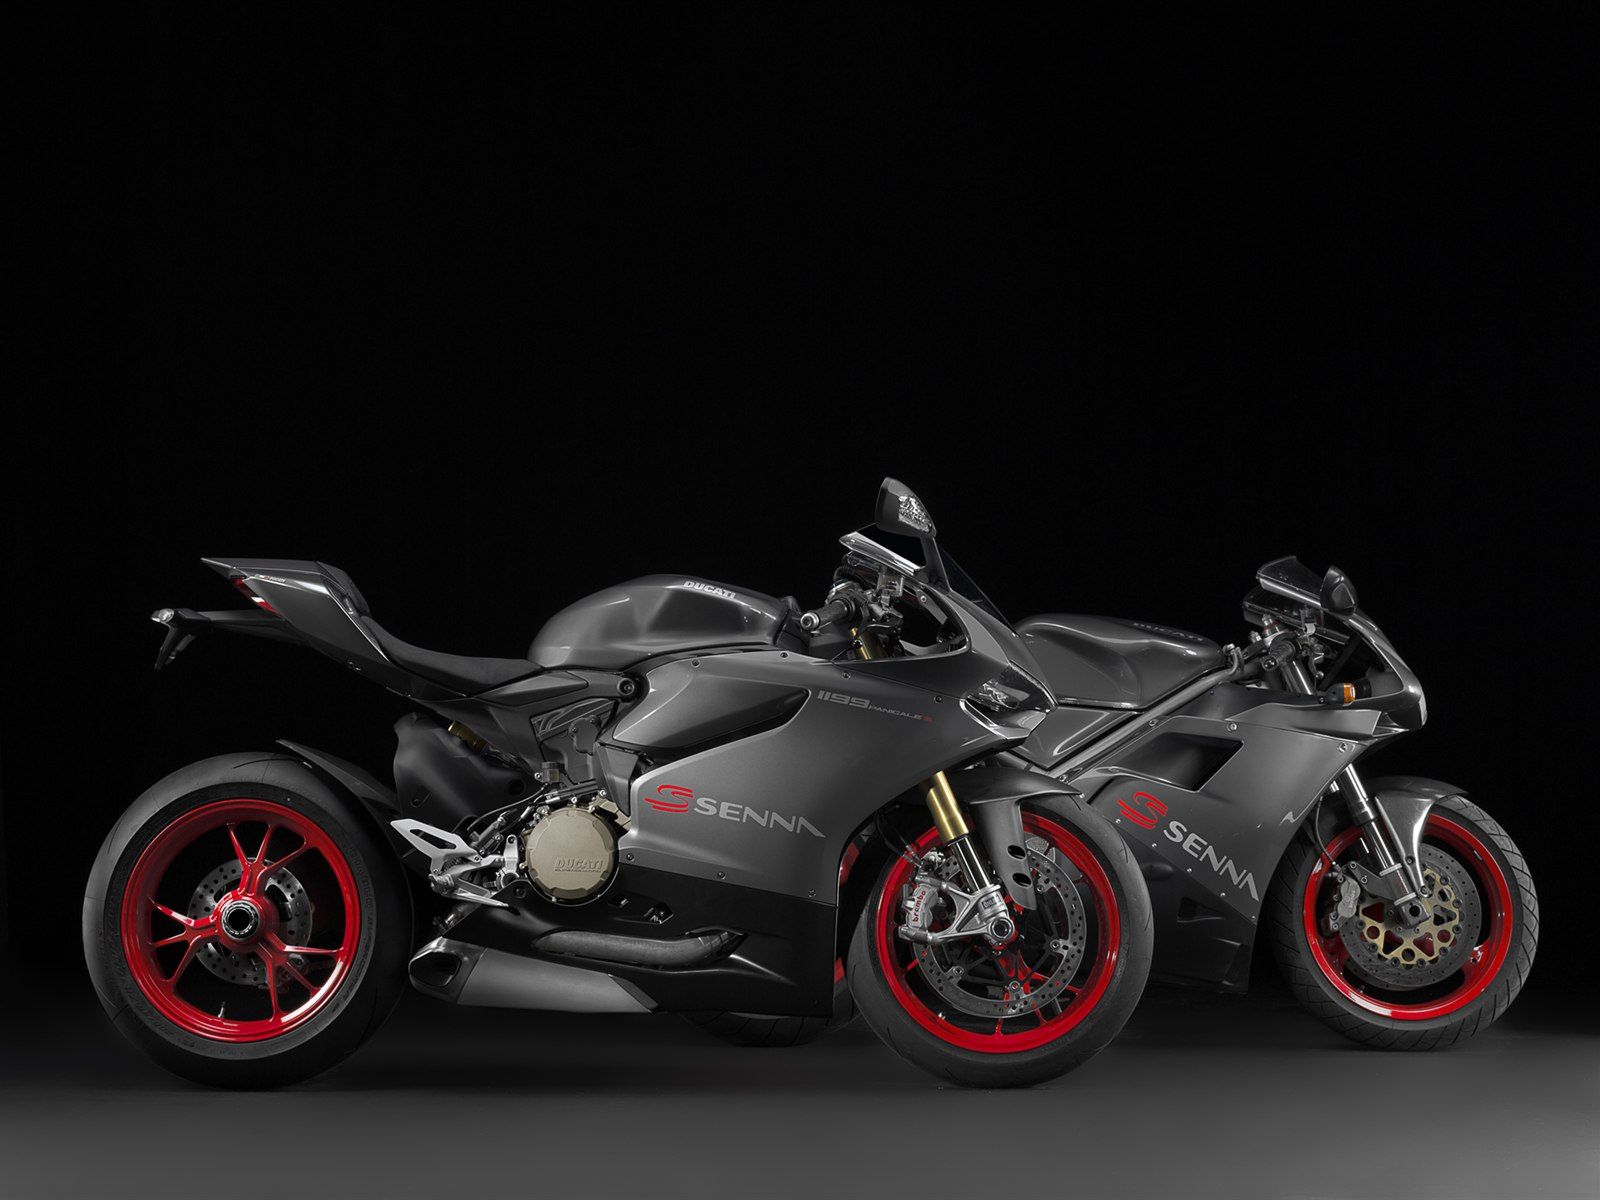 Ducati 1199 Panigale S Senna 2014 Exotic Car Wallpapers #02 of 6 ...